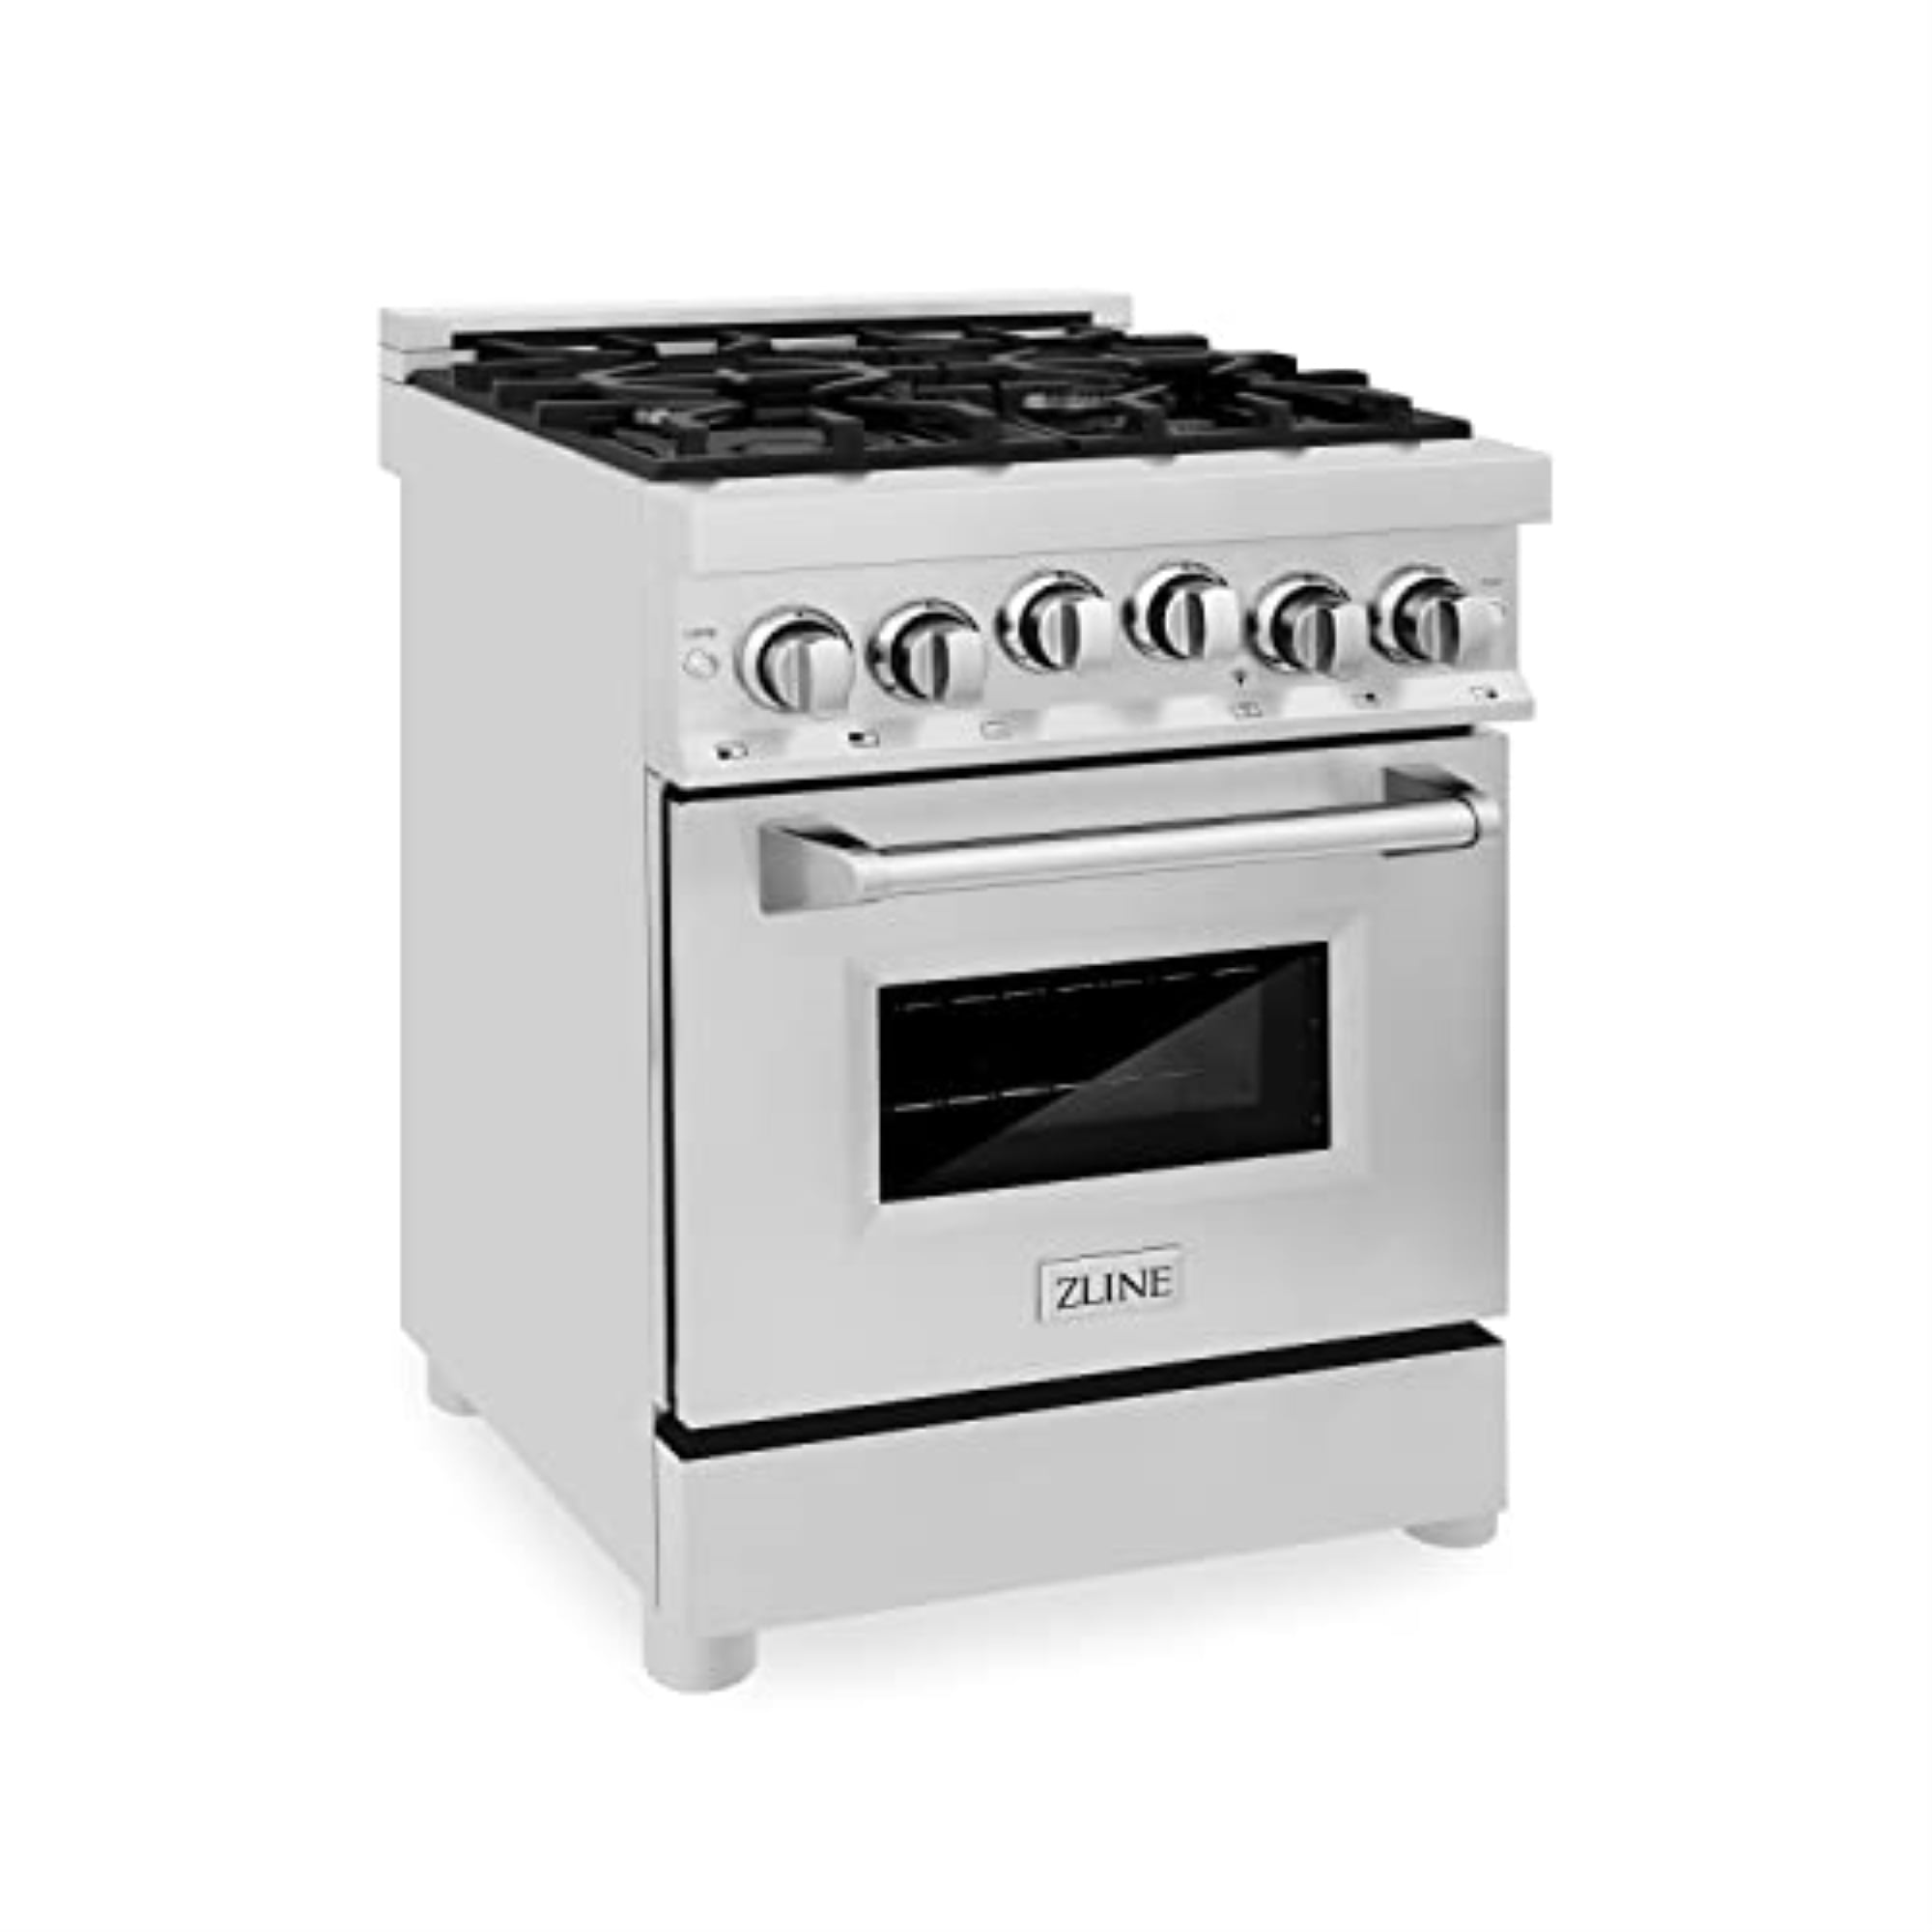 ZLINE 24 2.8 cu RG24 Range with Gas Stove and Gas Oven in Stainless Steel ft 